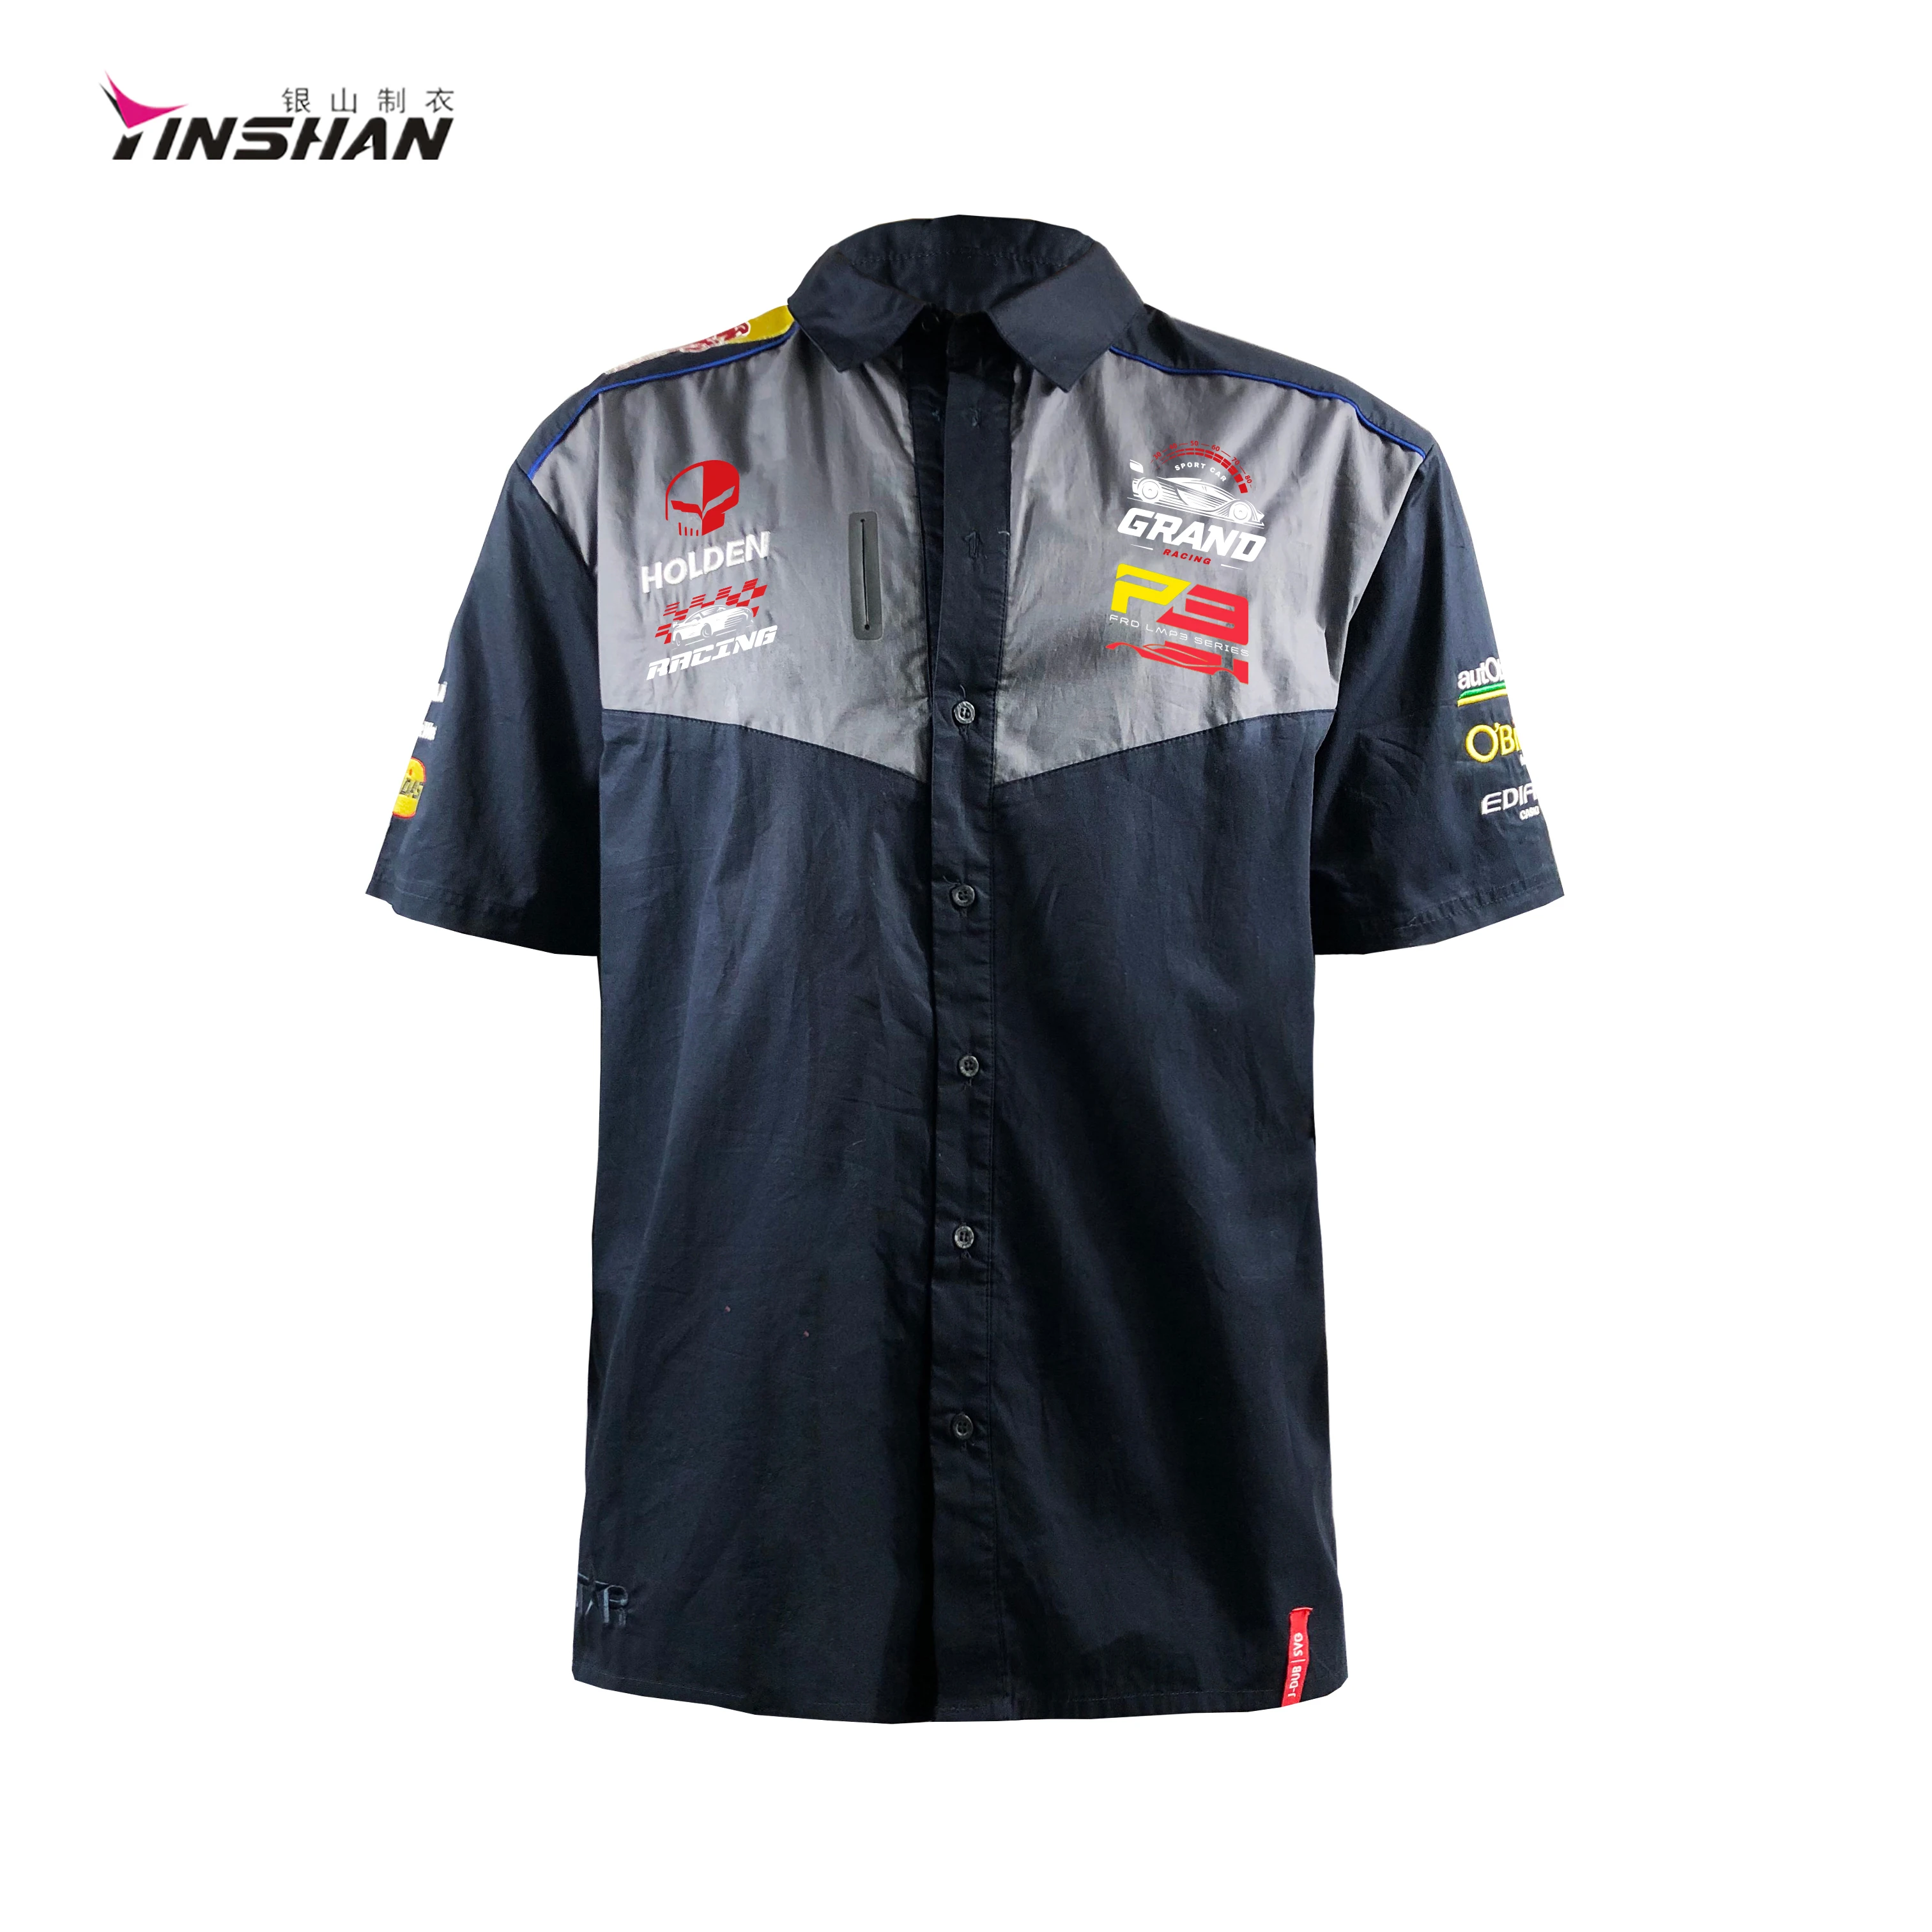 Oem Customized Sublimation Summer Short-sleeved Team Cycling Sports ...